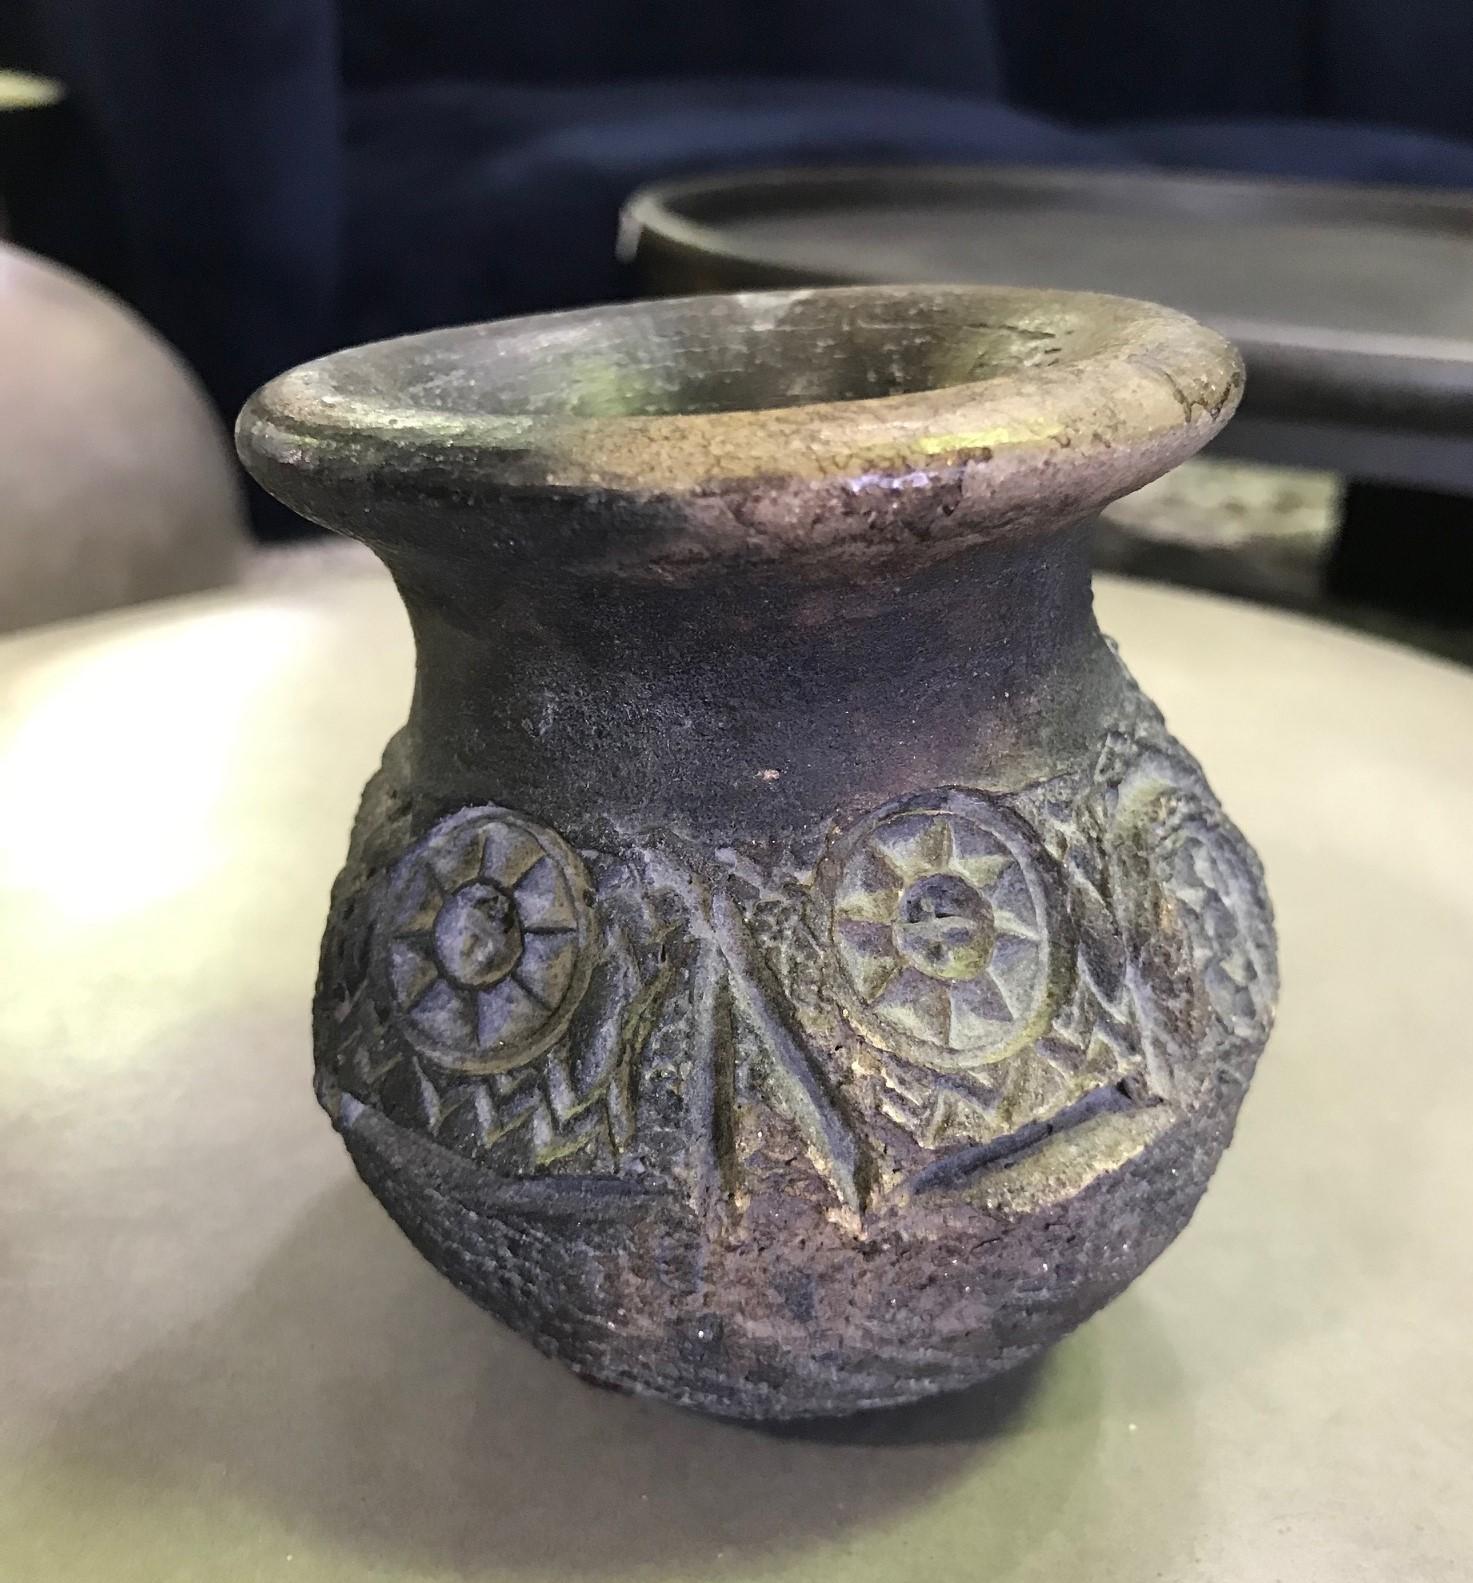 A strange and beautifully designed Pre-Columbian blackware cup or vase/vessel though a bit uneven/ lopsided. Gives it character. 

Well crafted with a nice patina. Comes from a collection of primitive and tribal artifacts along with three pieces